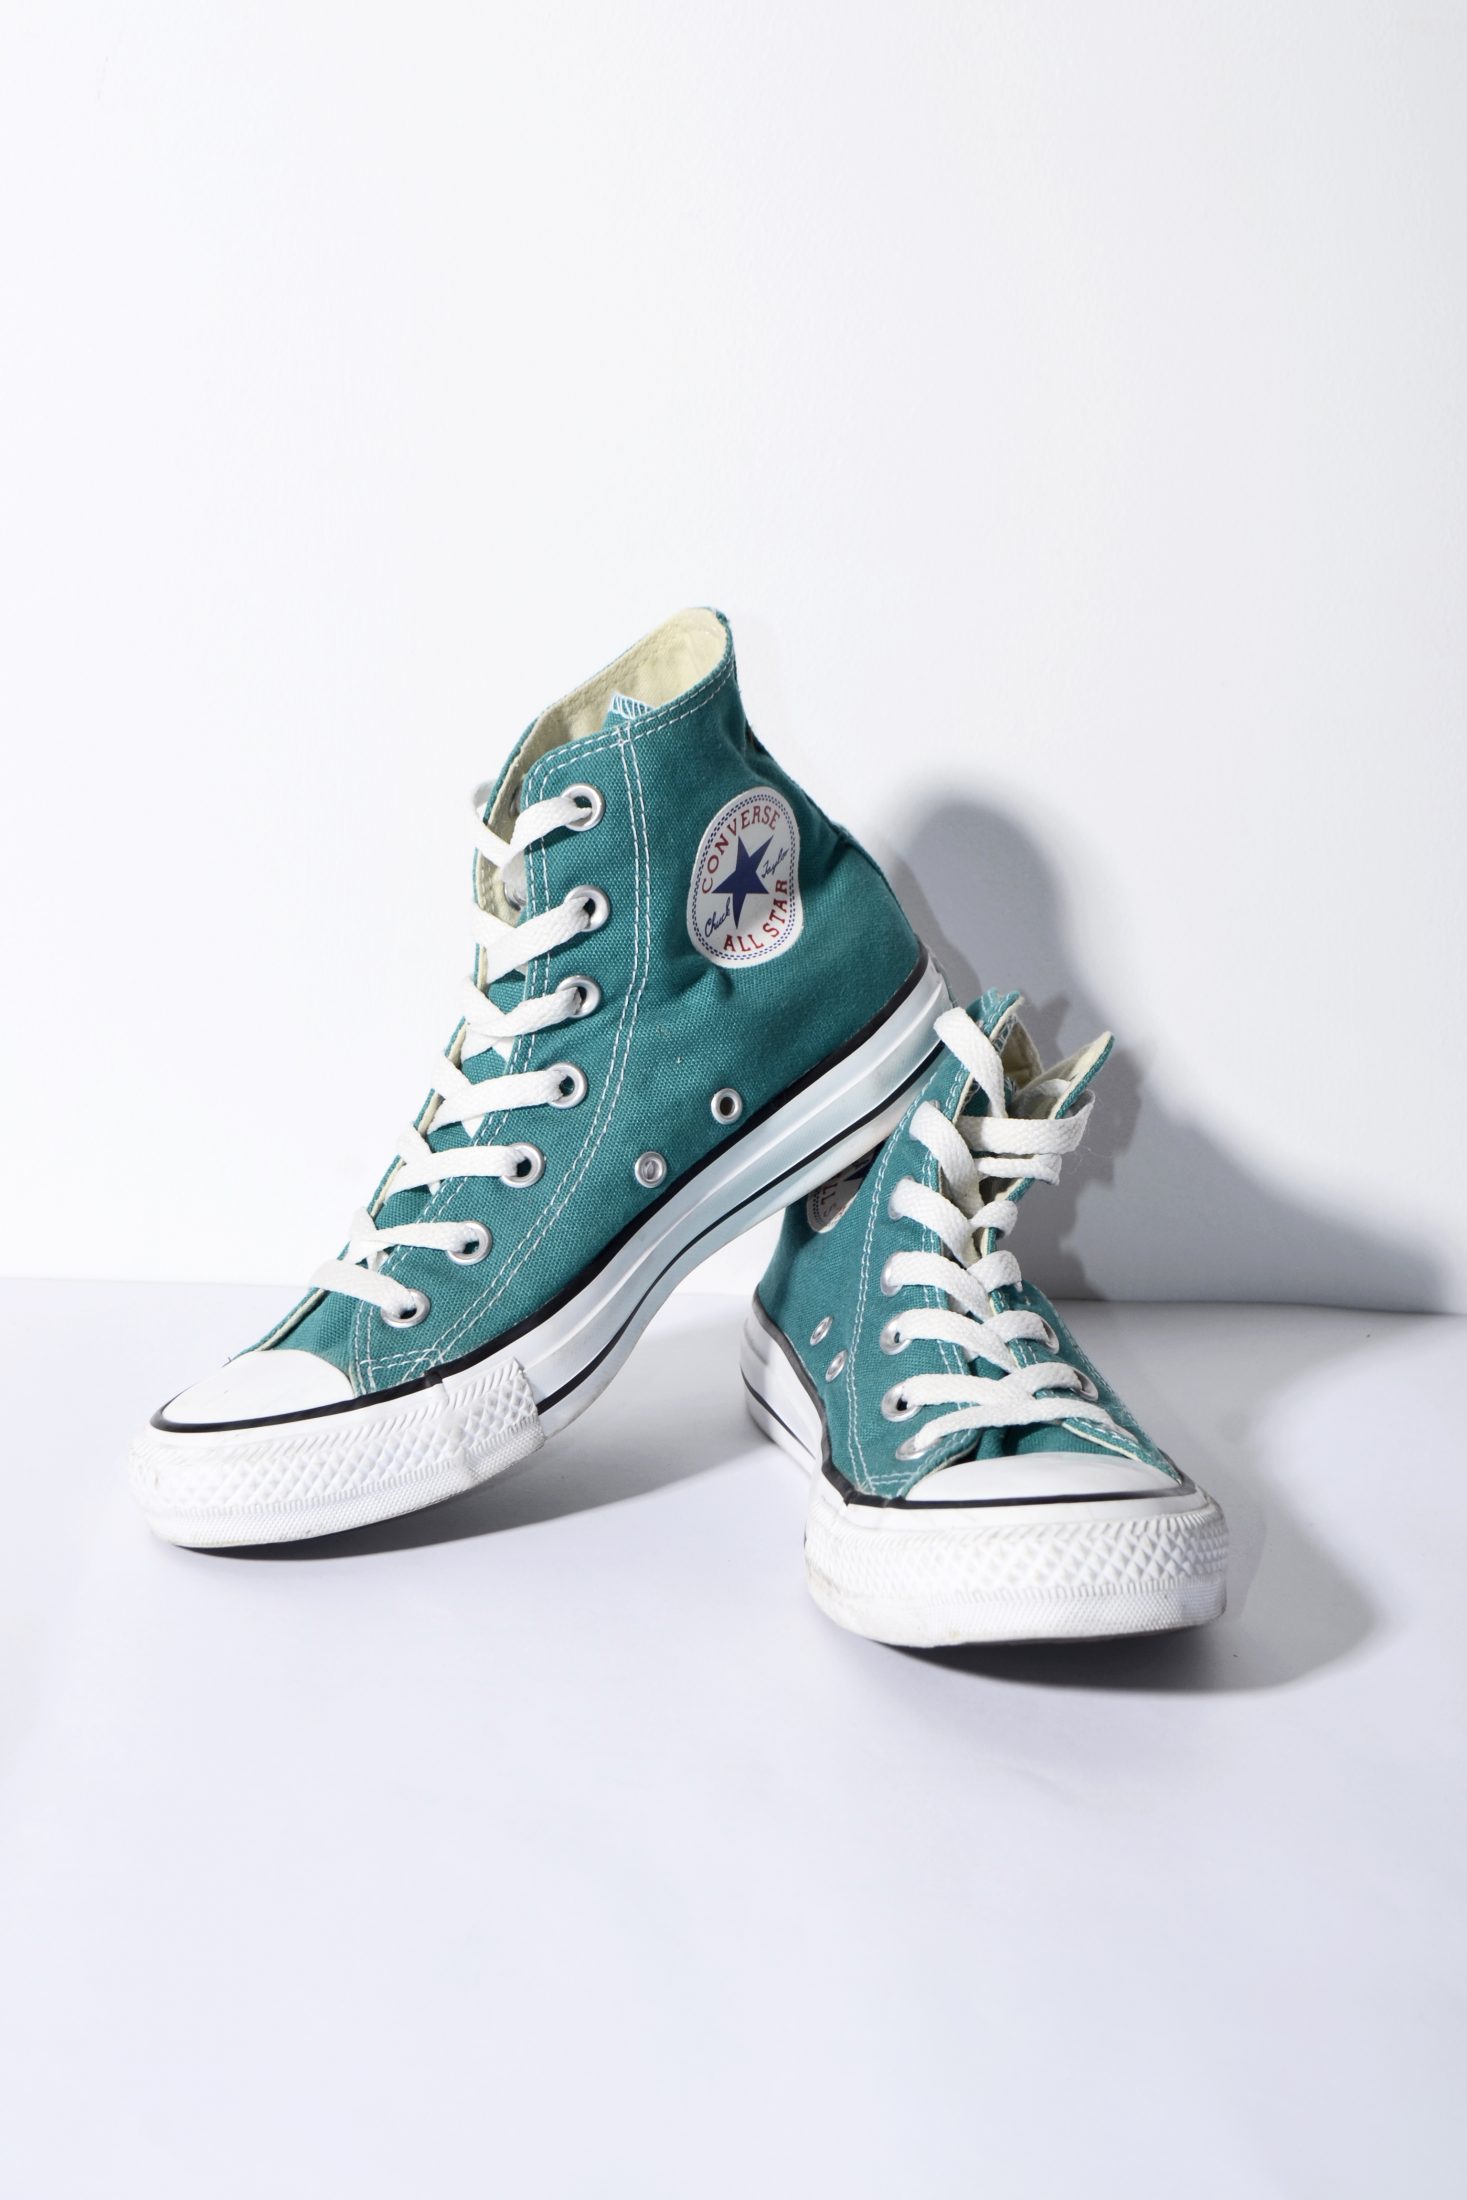 CONVERSE green shoes womens. HOT MILK vintage 90s sneakers online